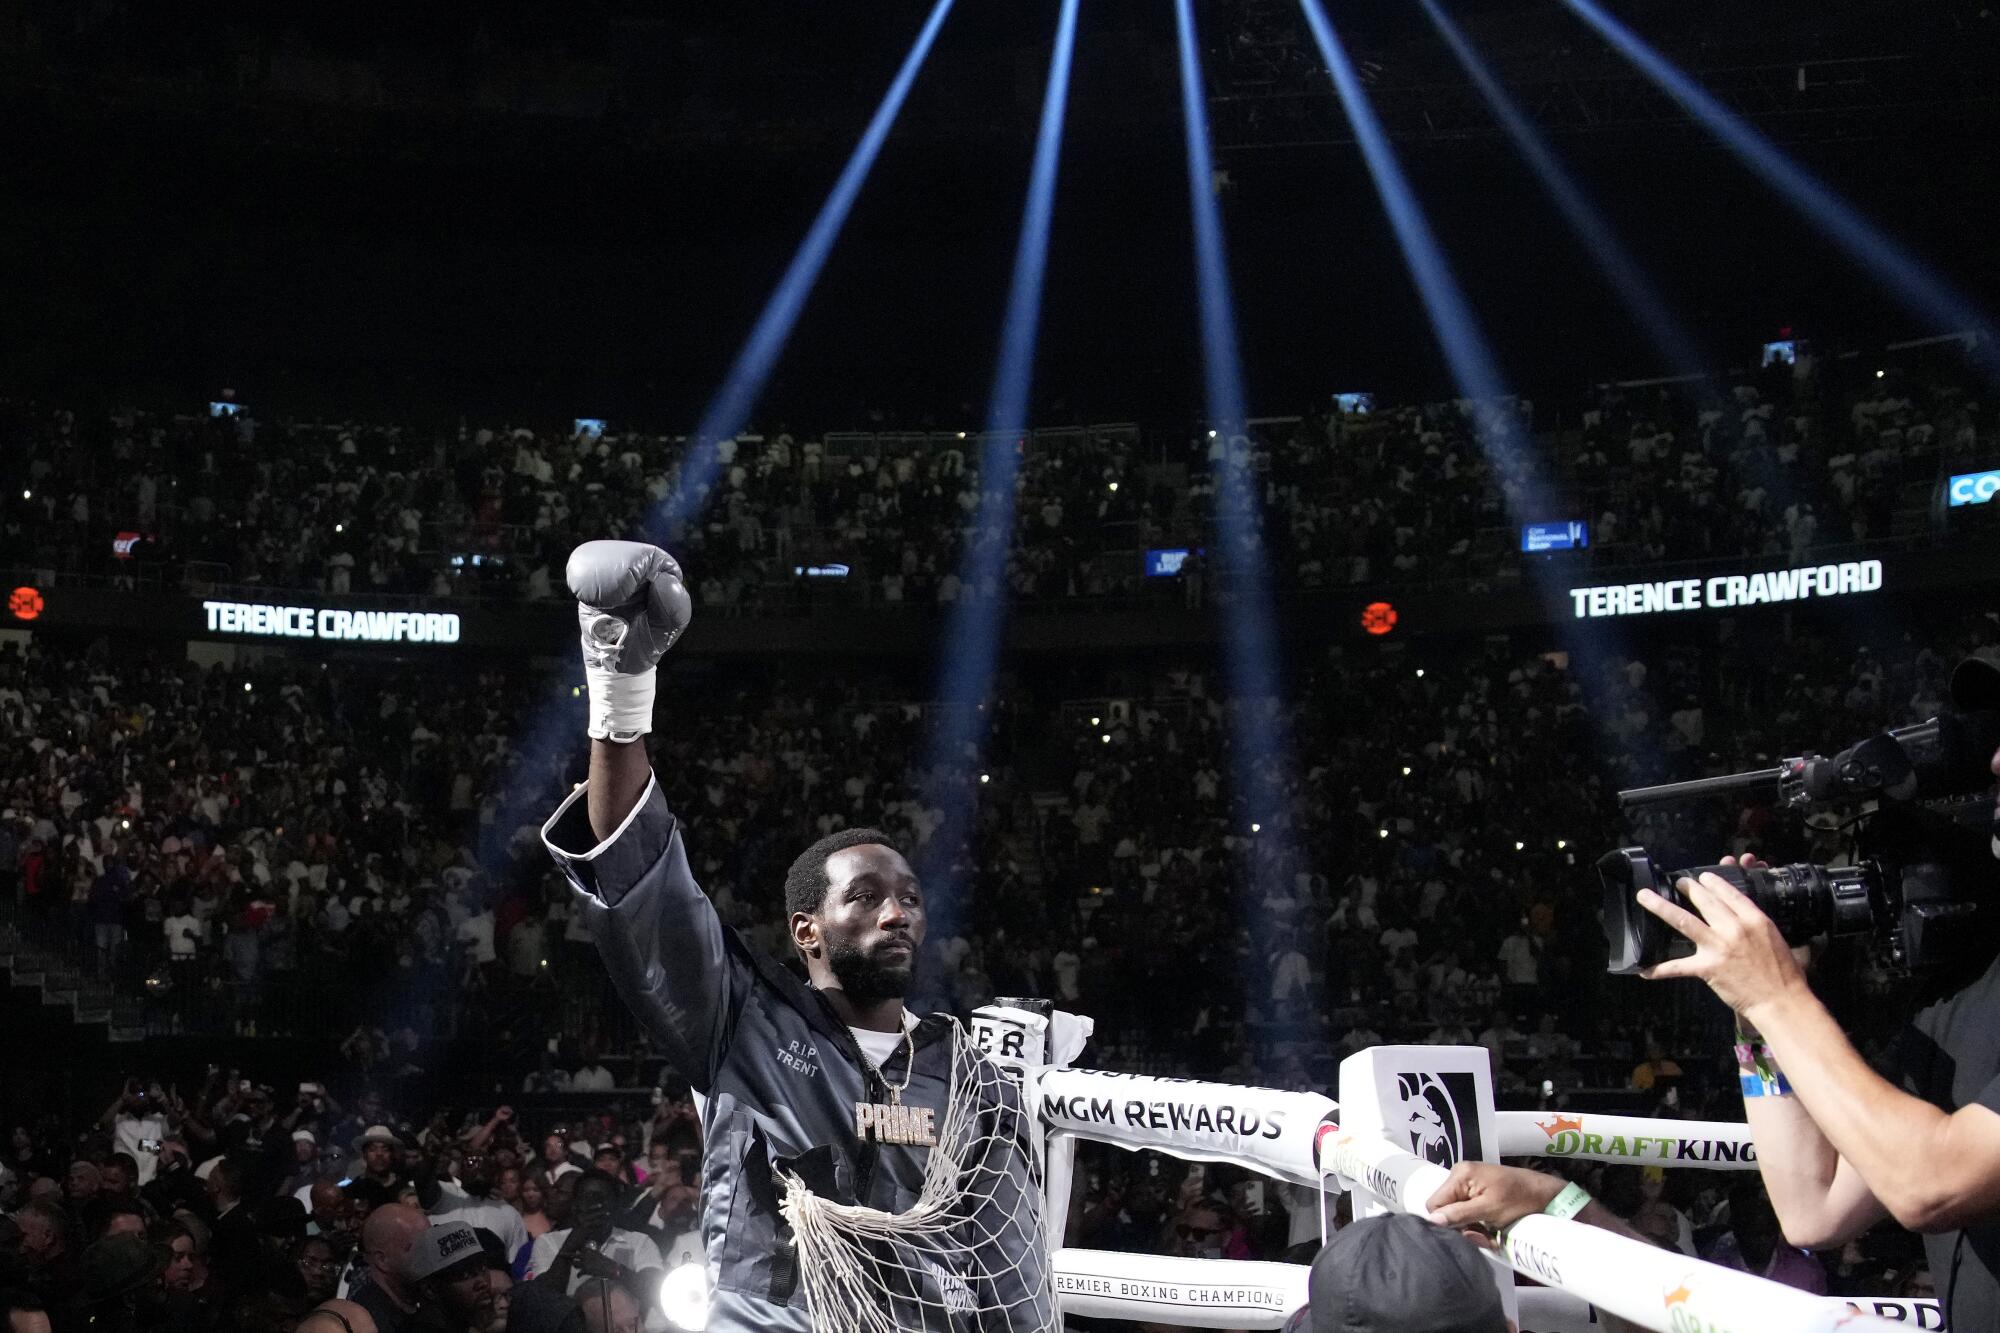 Terence Crawford salutes the crowd before entering the ring prior to his fight against Errol Spence Jr. 